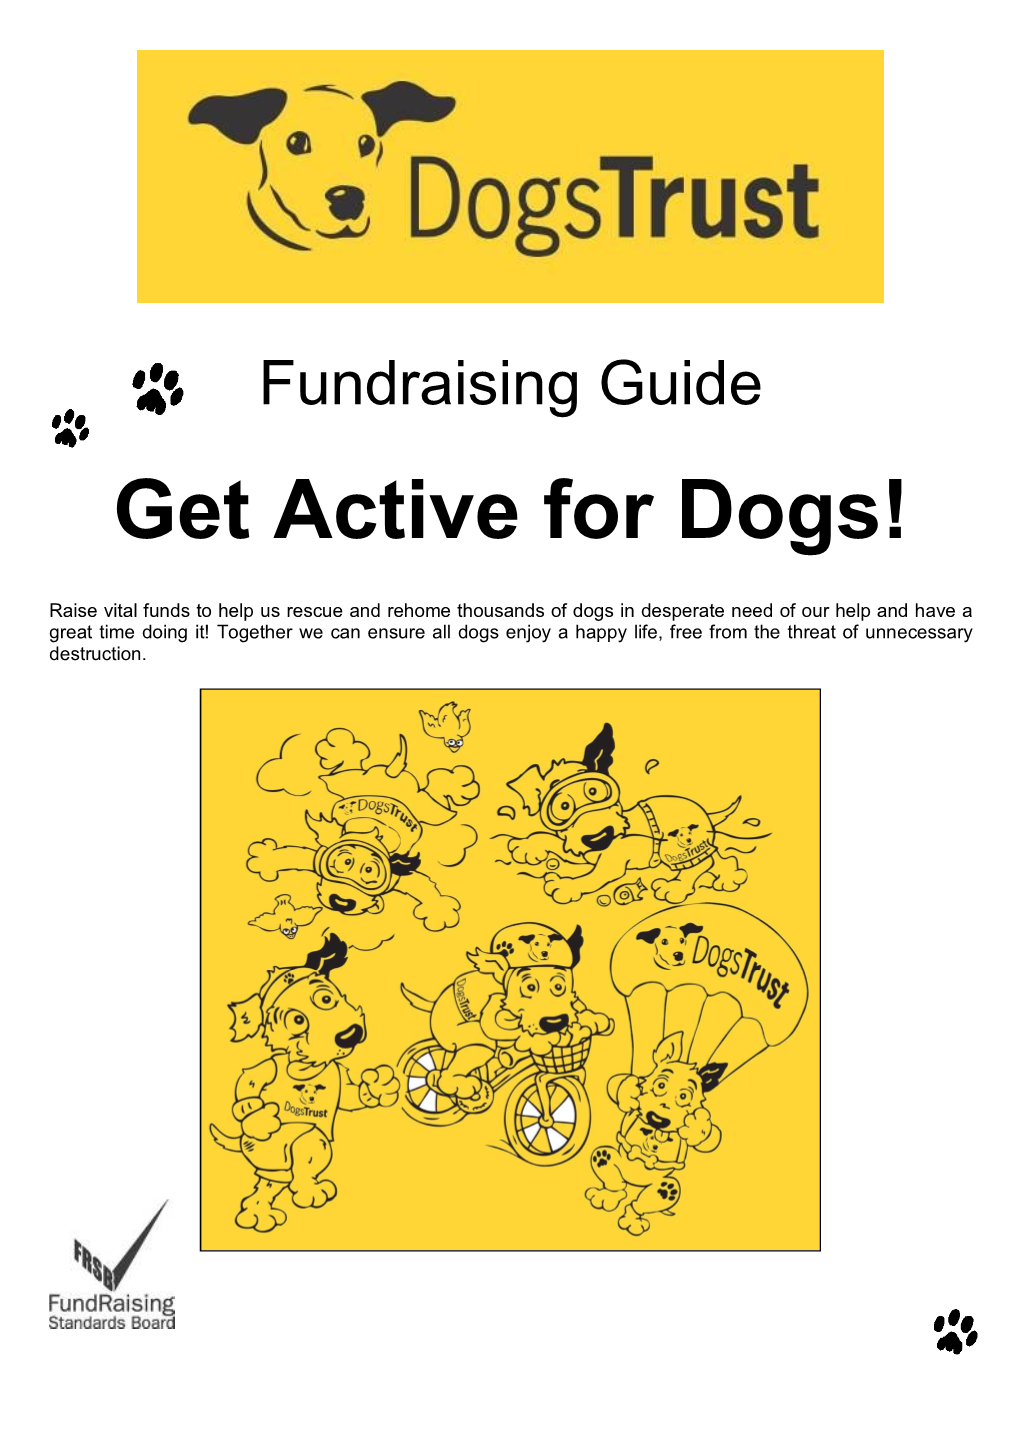 Get Active for Dogs!